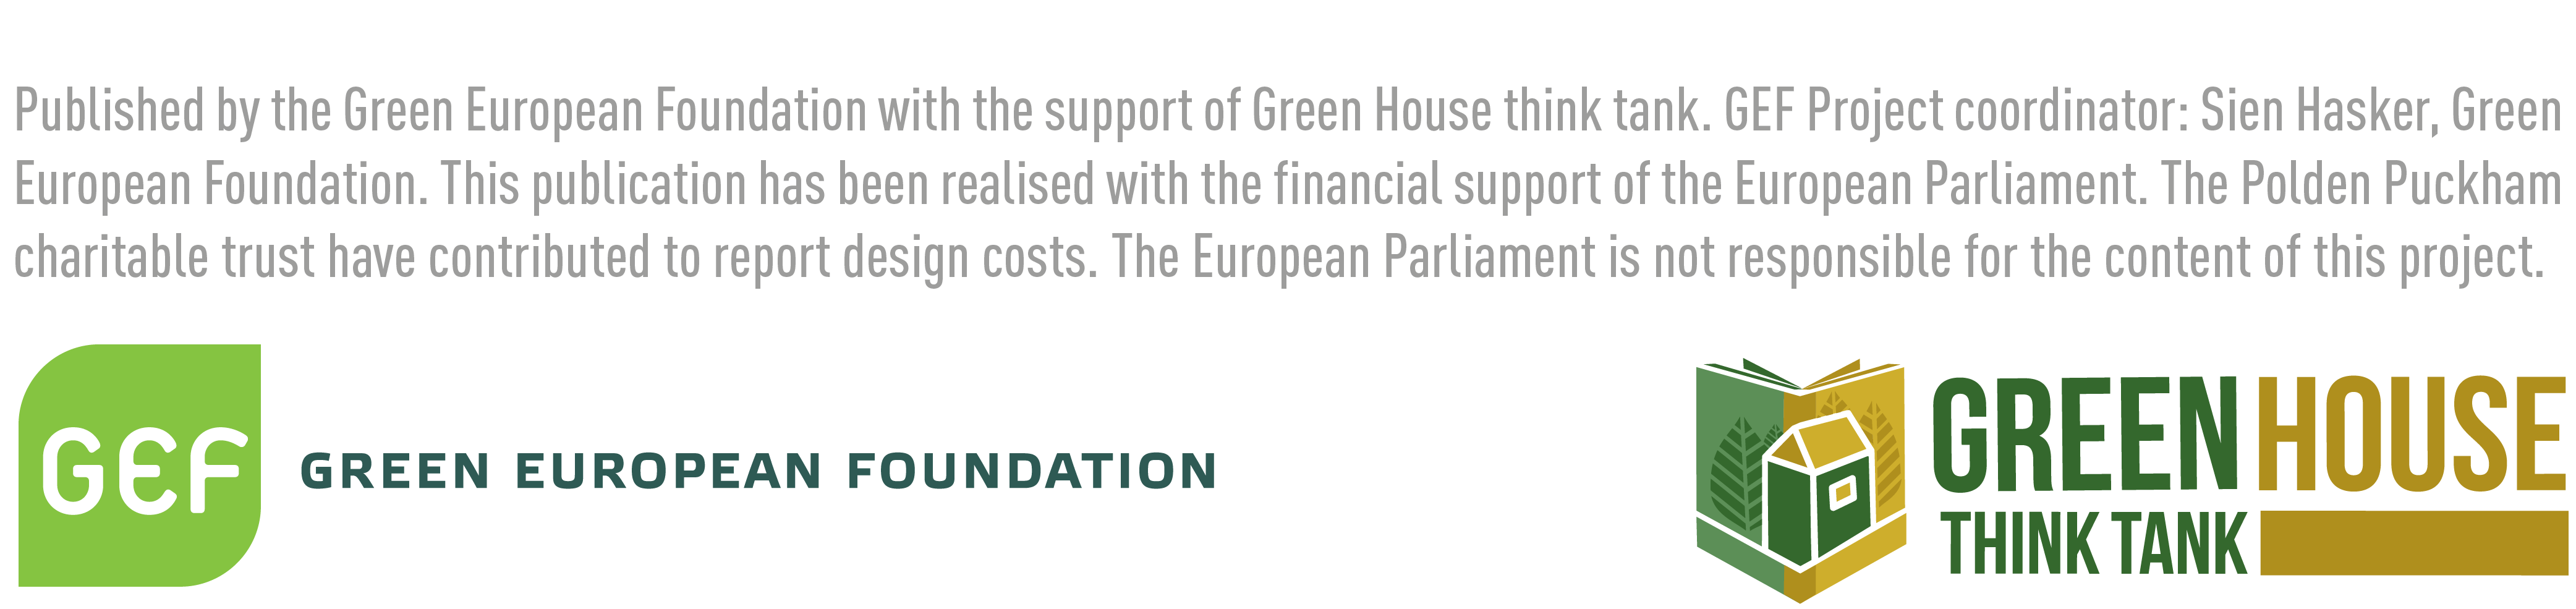 Images of the logos of the Green European Foundation and Green House Think Tank with text that reads Published by the Green European Foundation with the support of Green House think tank. GEF project coordinator: Sian Hasker, Green European Foundation. This publication has been realised with financial support of the European parliament. The Polden Puckham charitable trust have contributed to the report design costs. The European Parliament is not responsible for the content of this project.